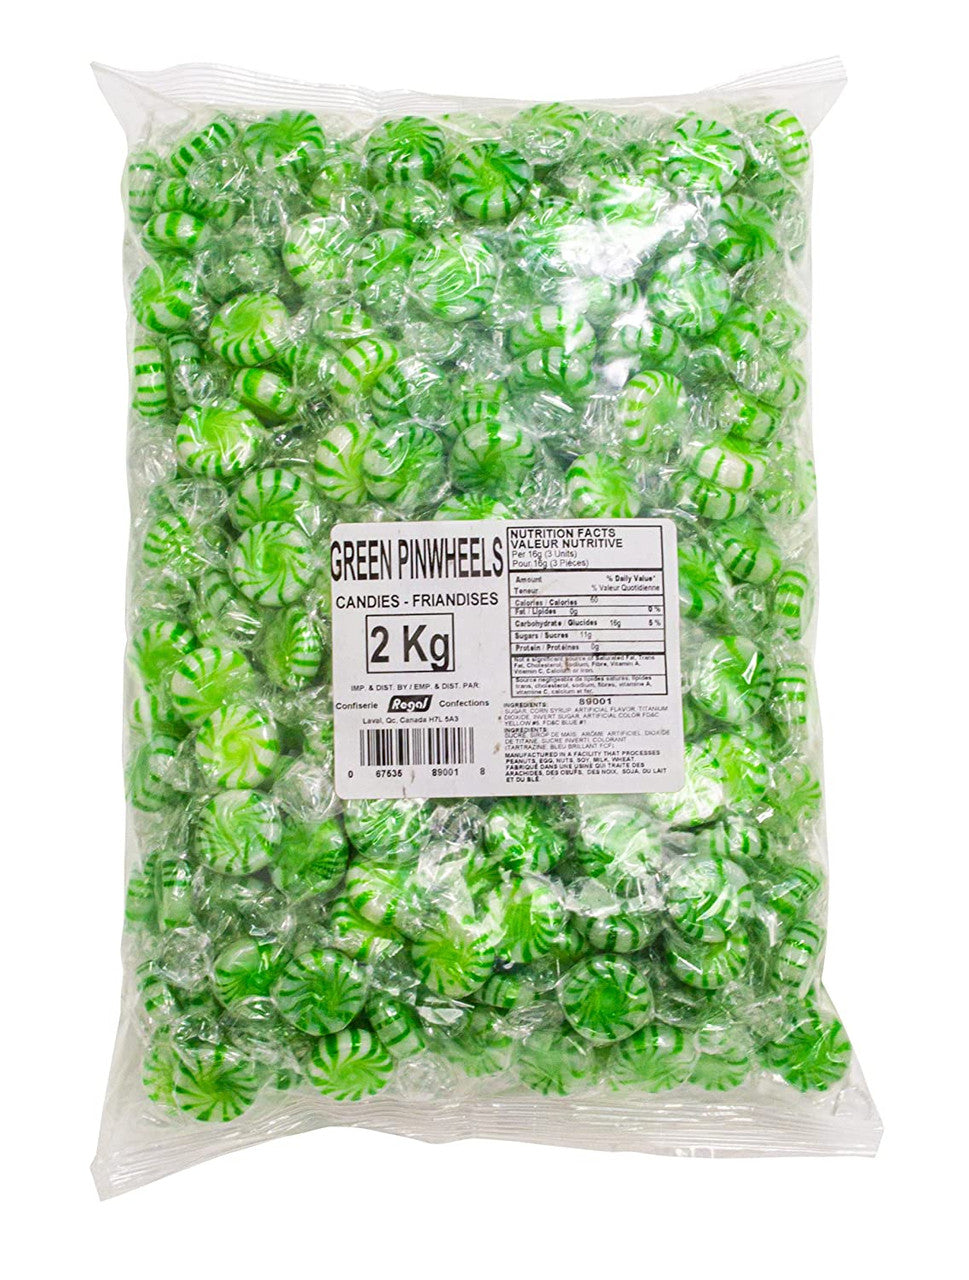 Regal Confections, Green Pinwheels Candies, 2kg/4.4lbs. Bag, {Imported from Canada}